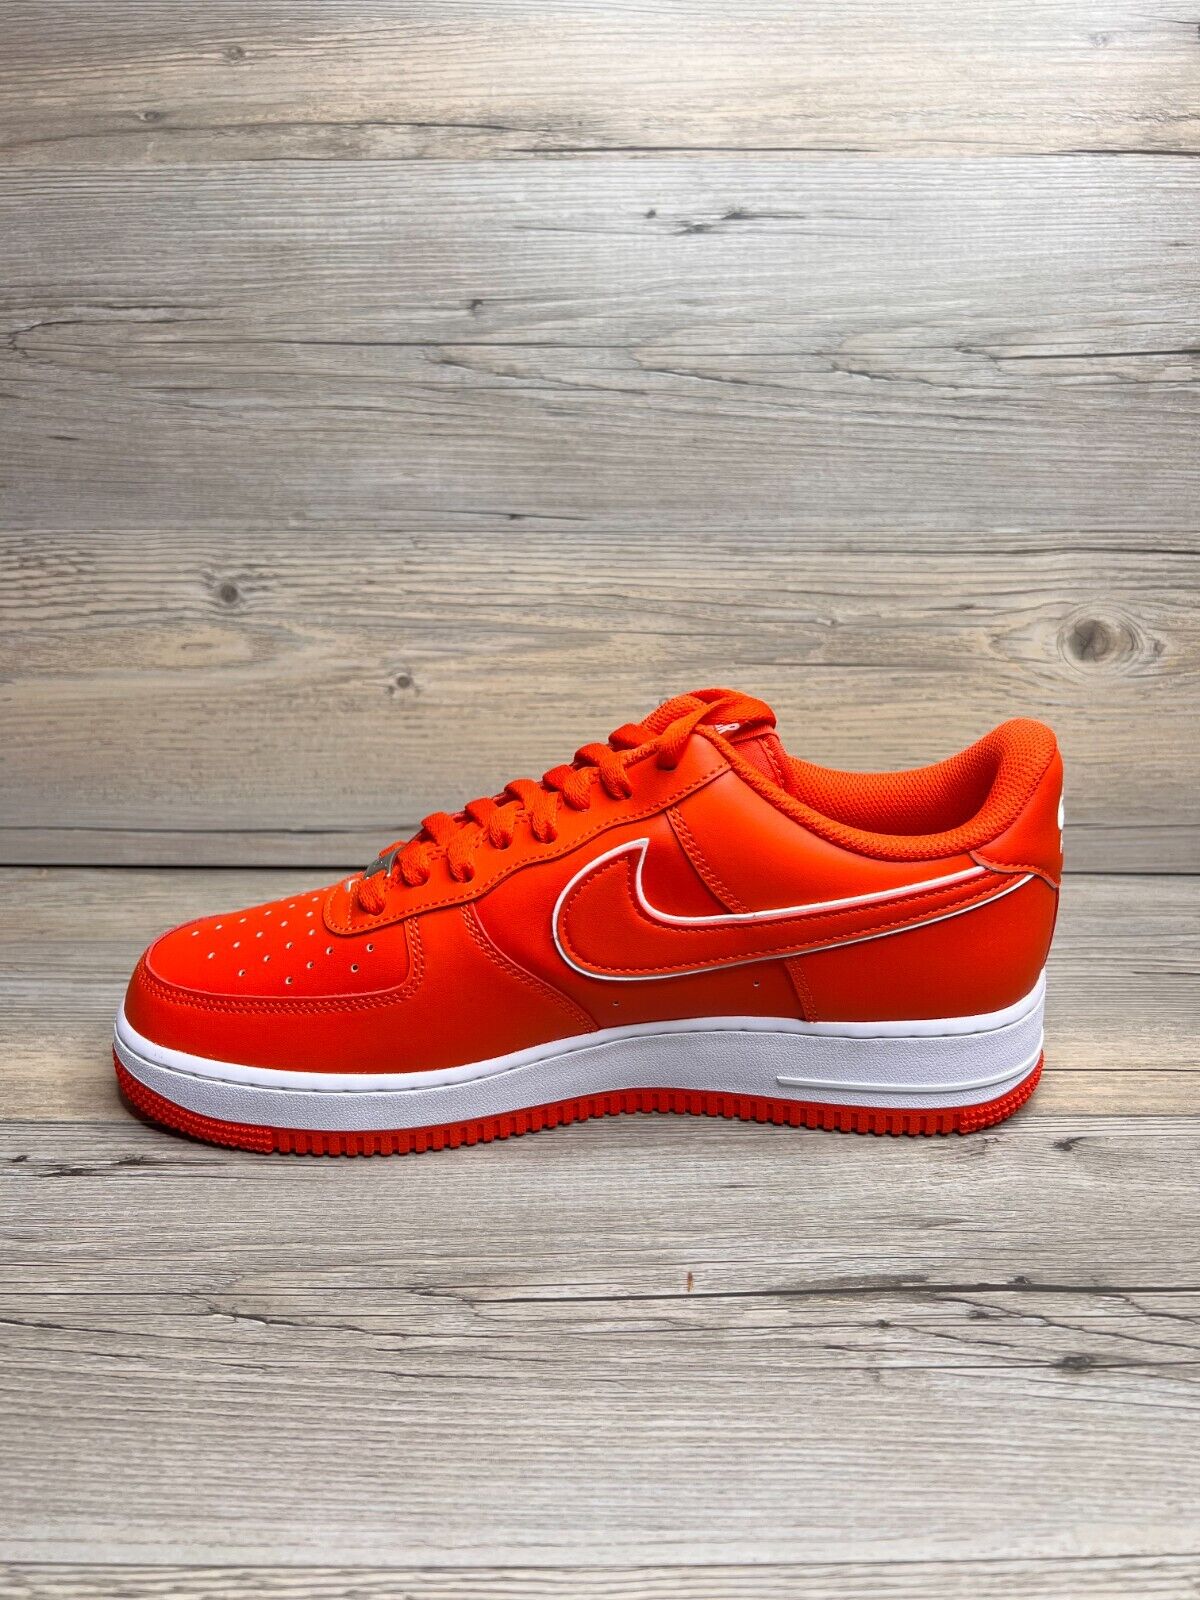 Nike Air Force 1 Low 07 Mens Size 12 Picante Red White DV0788 600